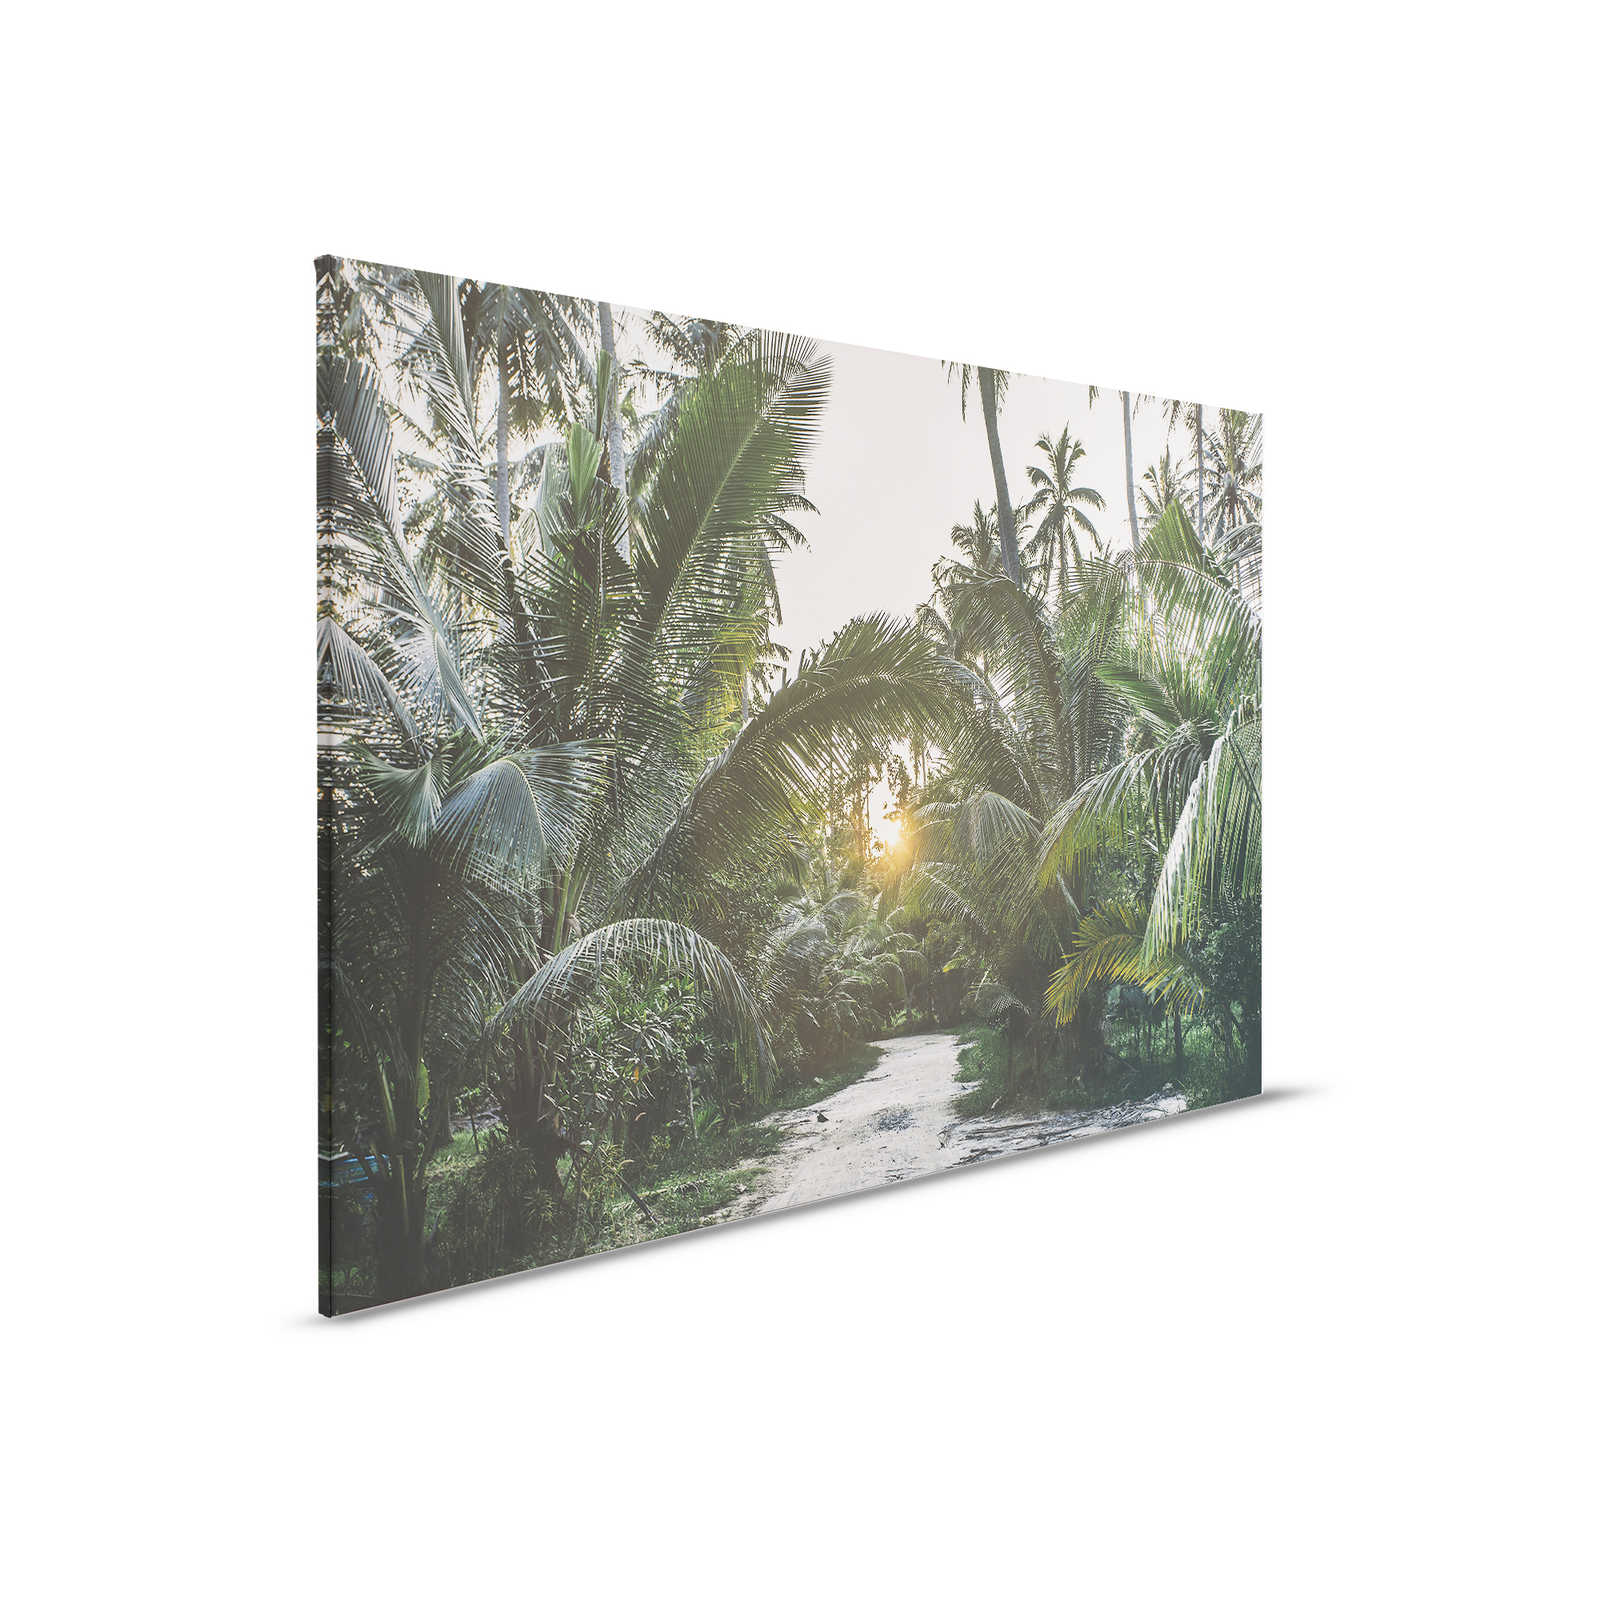         Canvas painting with path through a tropical jungle - 0.90 m x 0.60 m
    